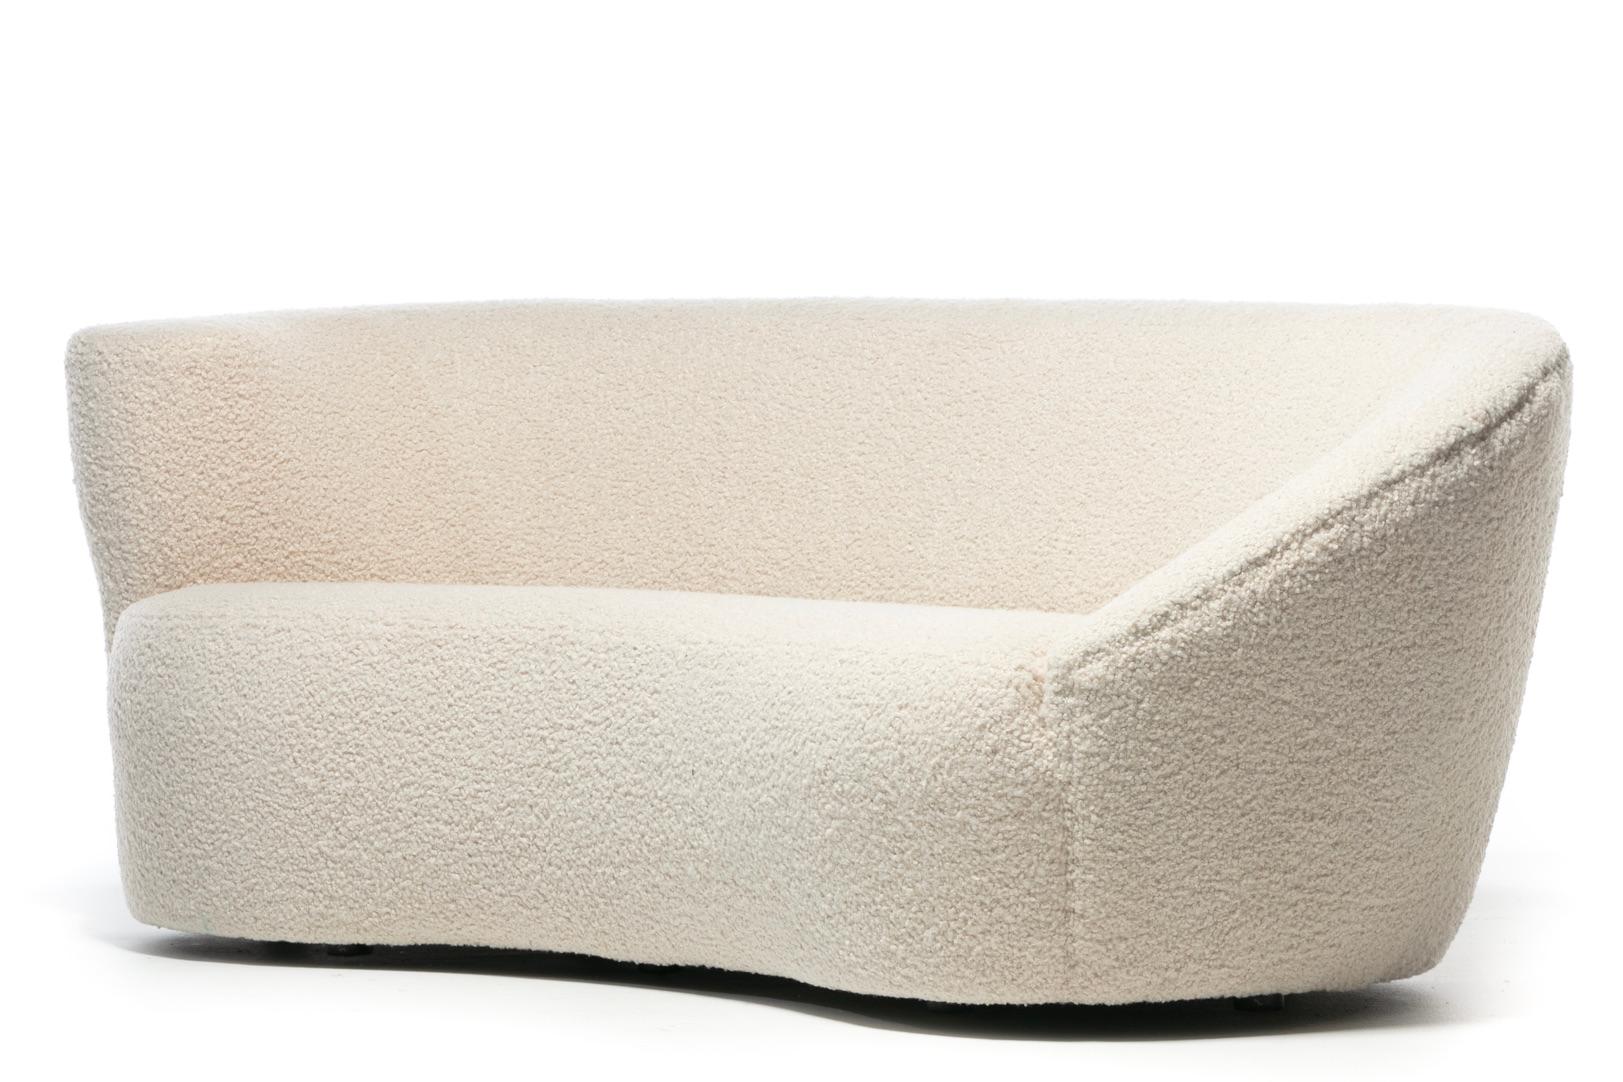 Late 20th Century Vladimir Kagan Nautilus Sofa in Ivory White Bouclé by Directional, c. 1990 For Sale